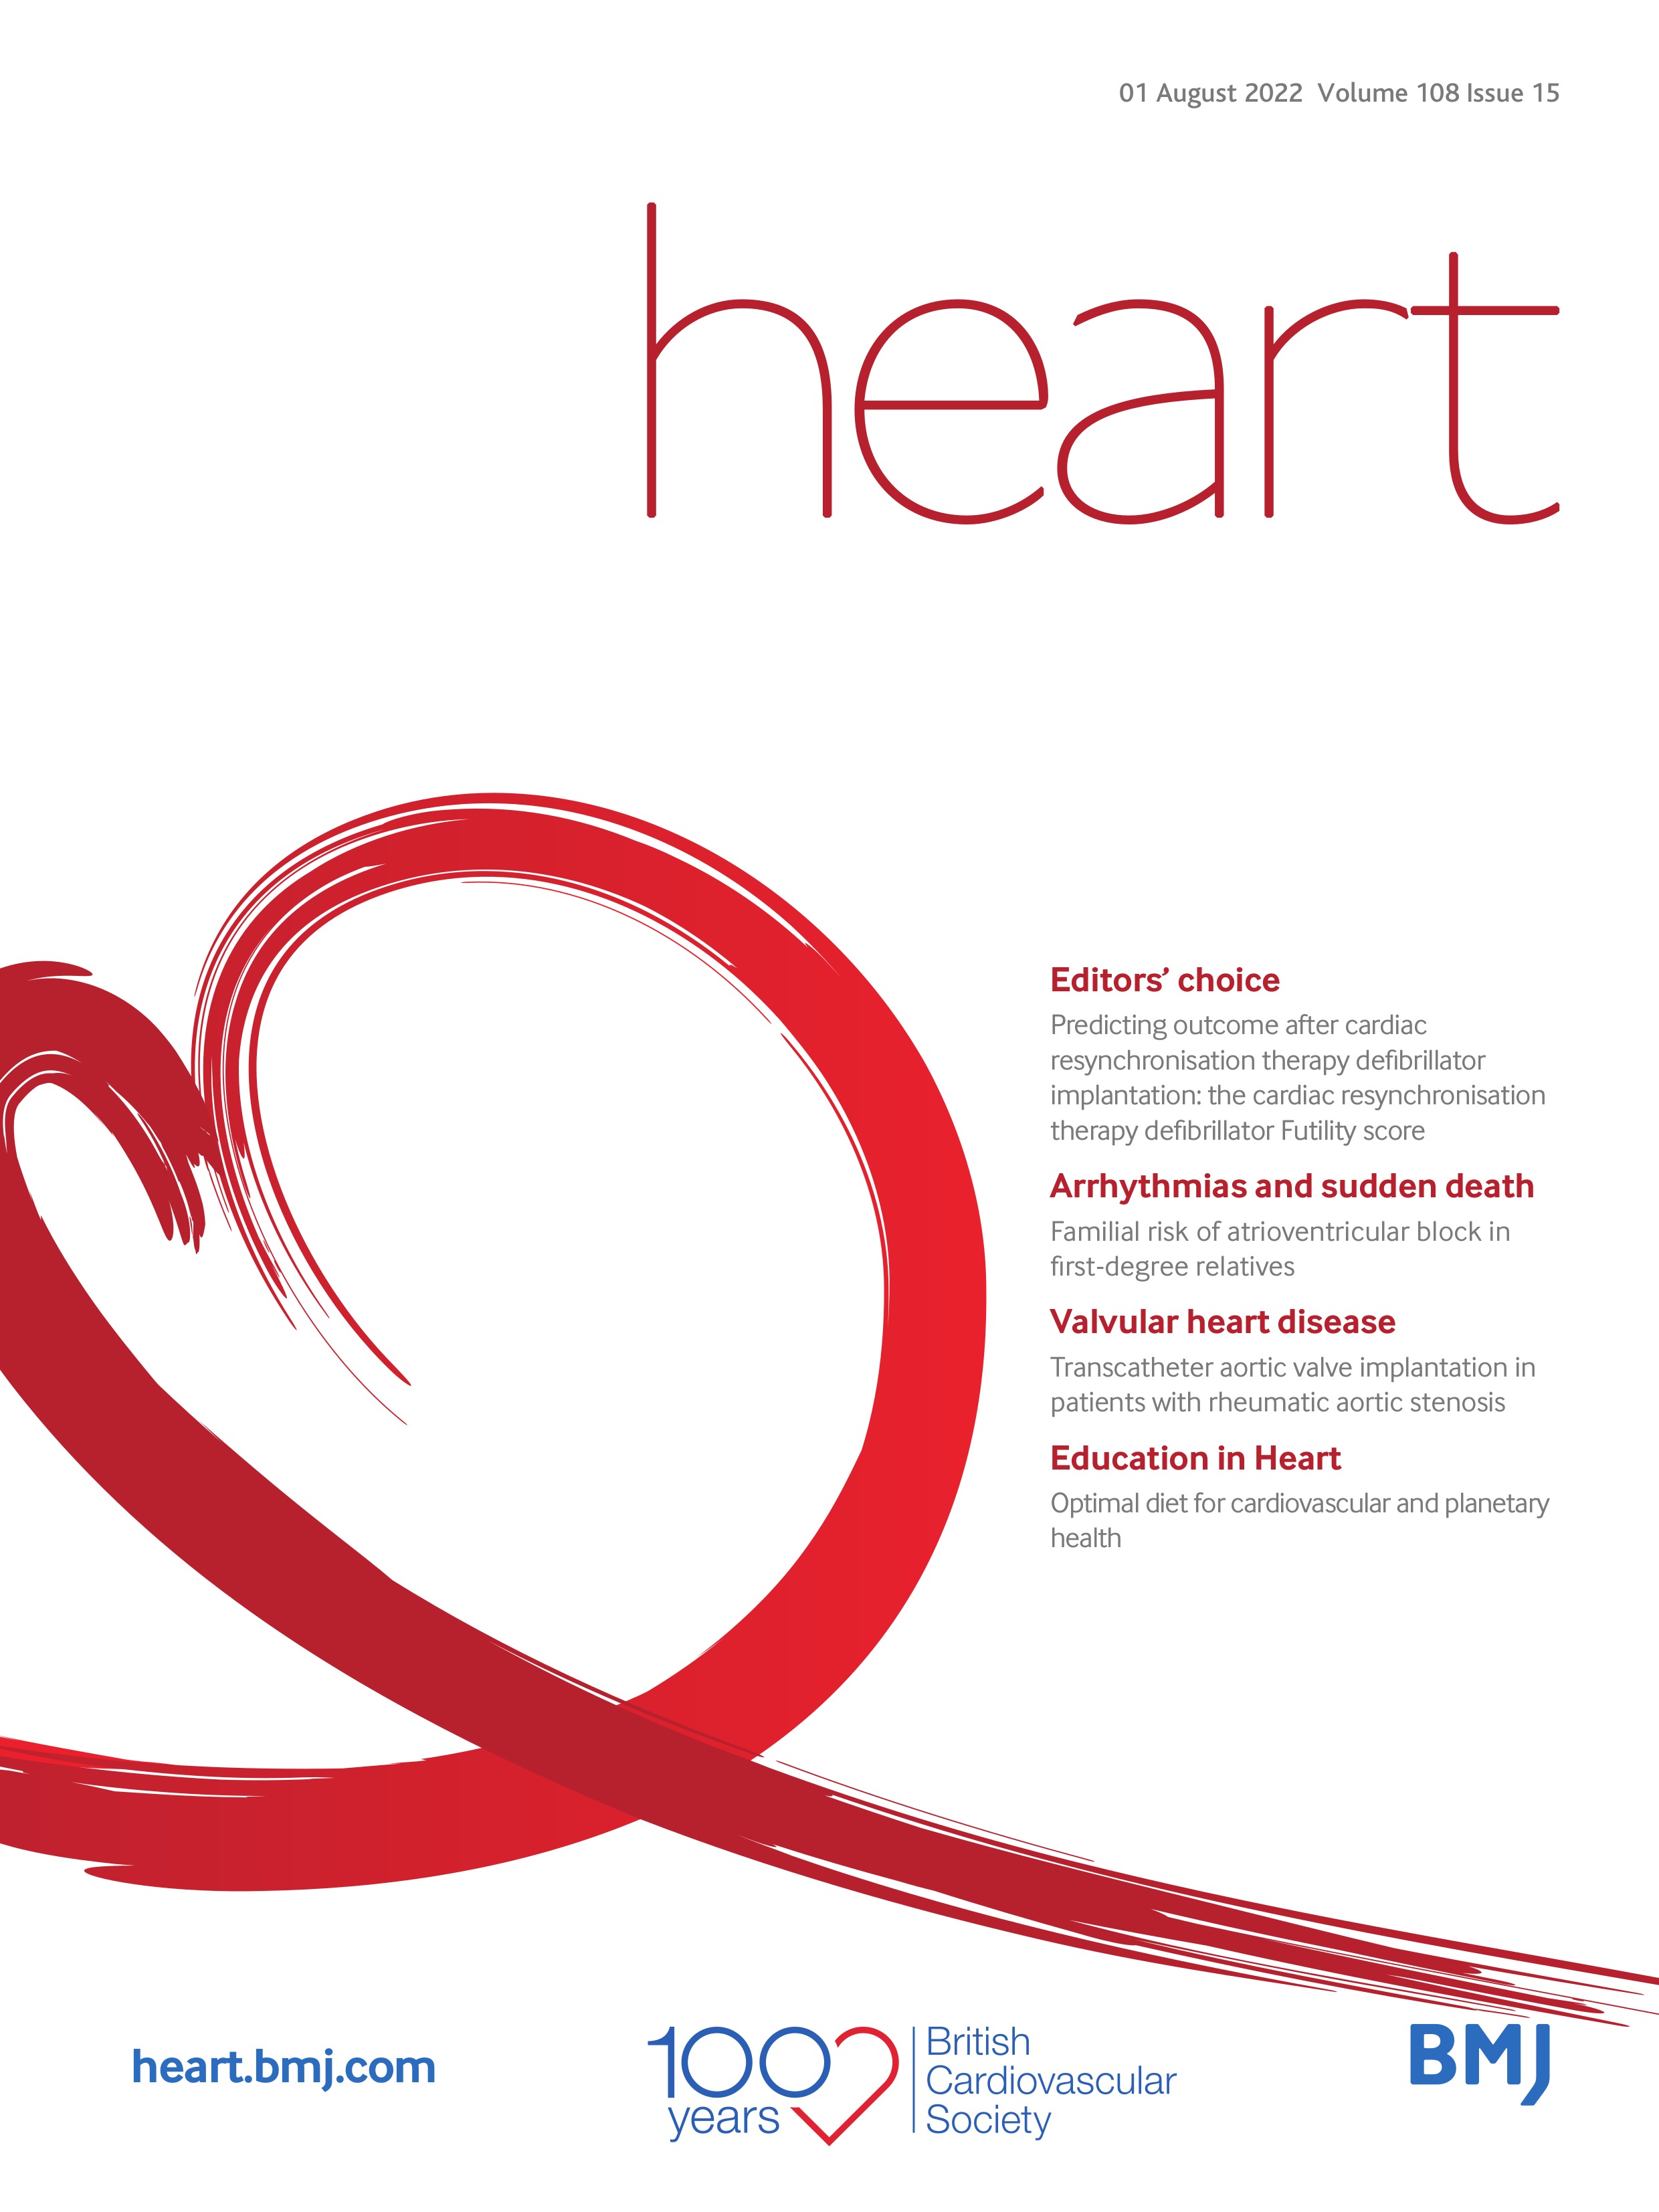 Inherited and modifiable factors need to be identified in young patients with atrioventricular block